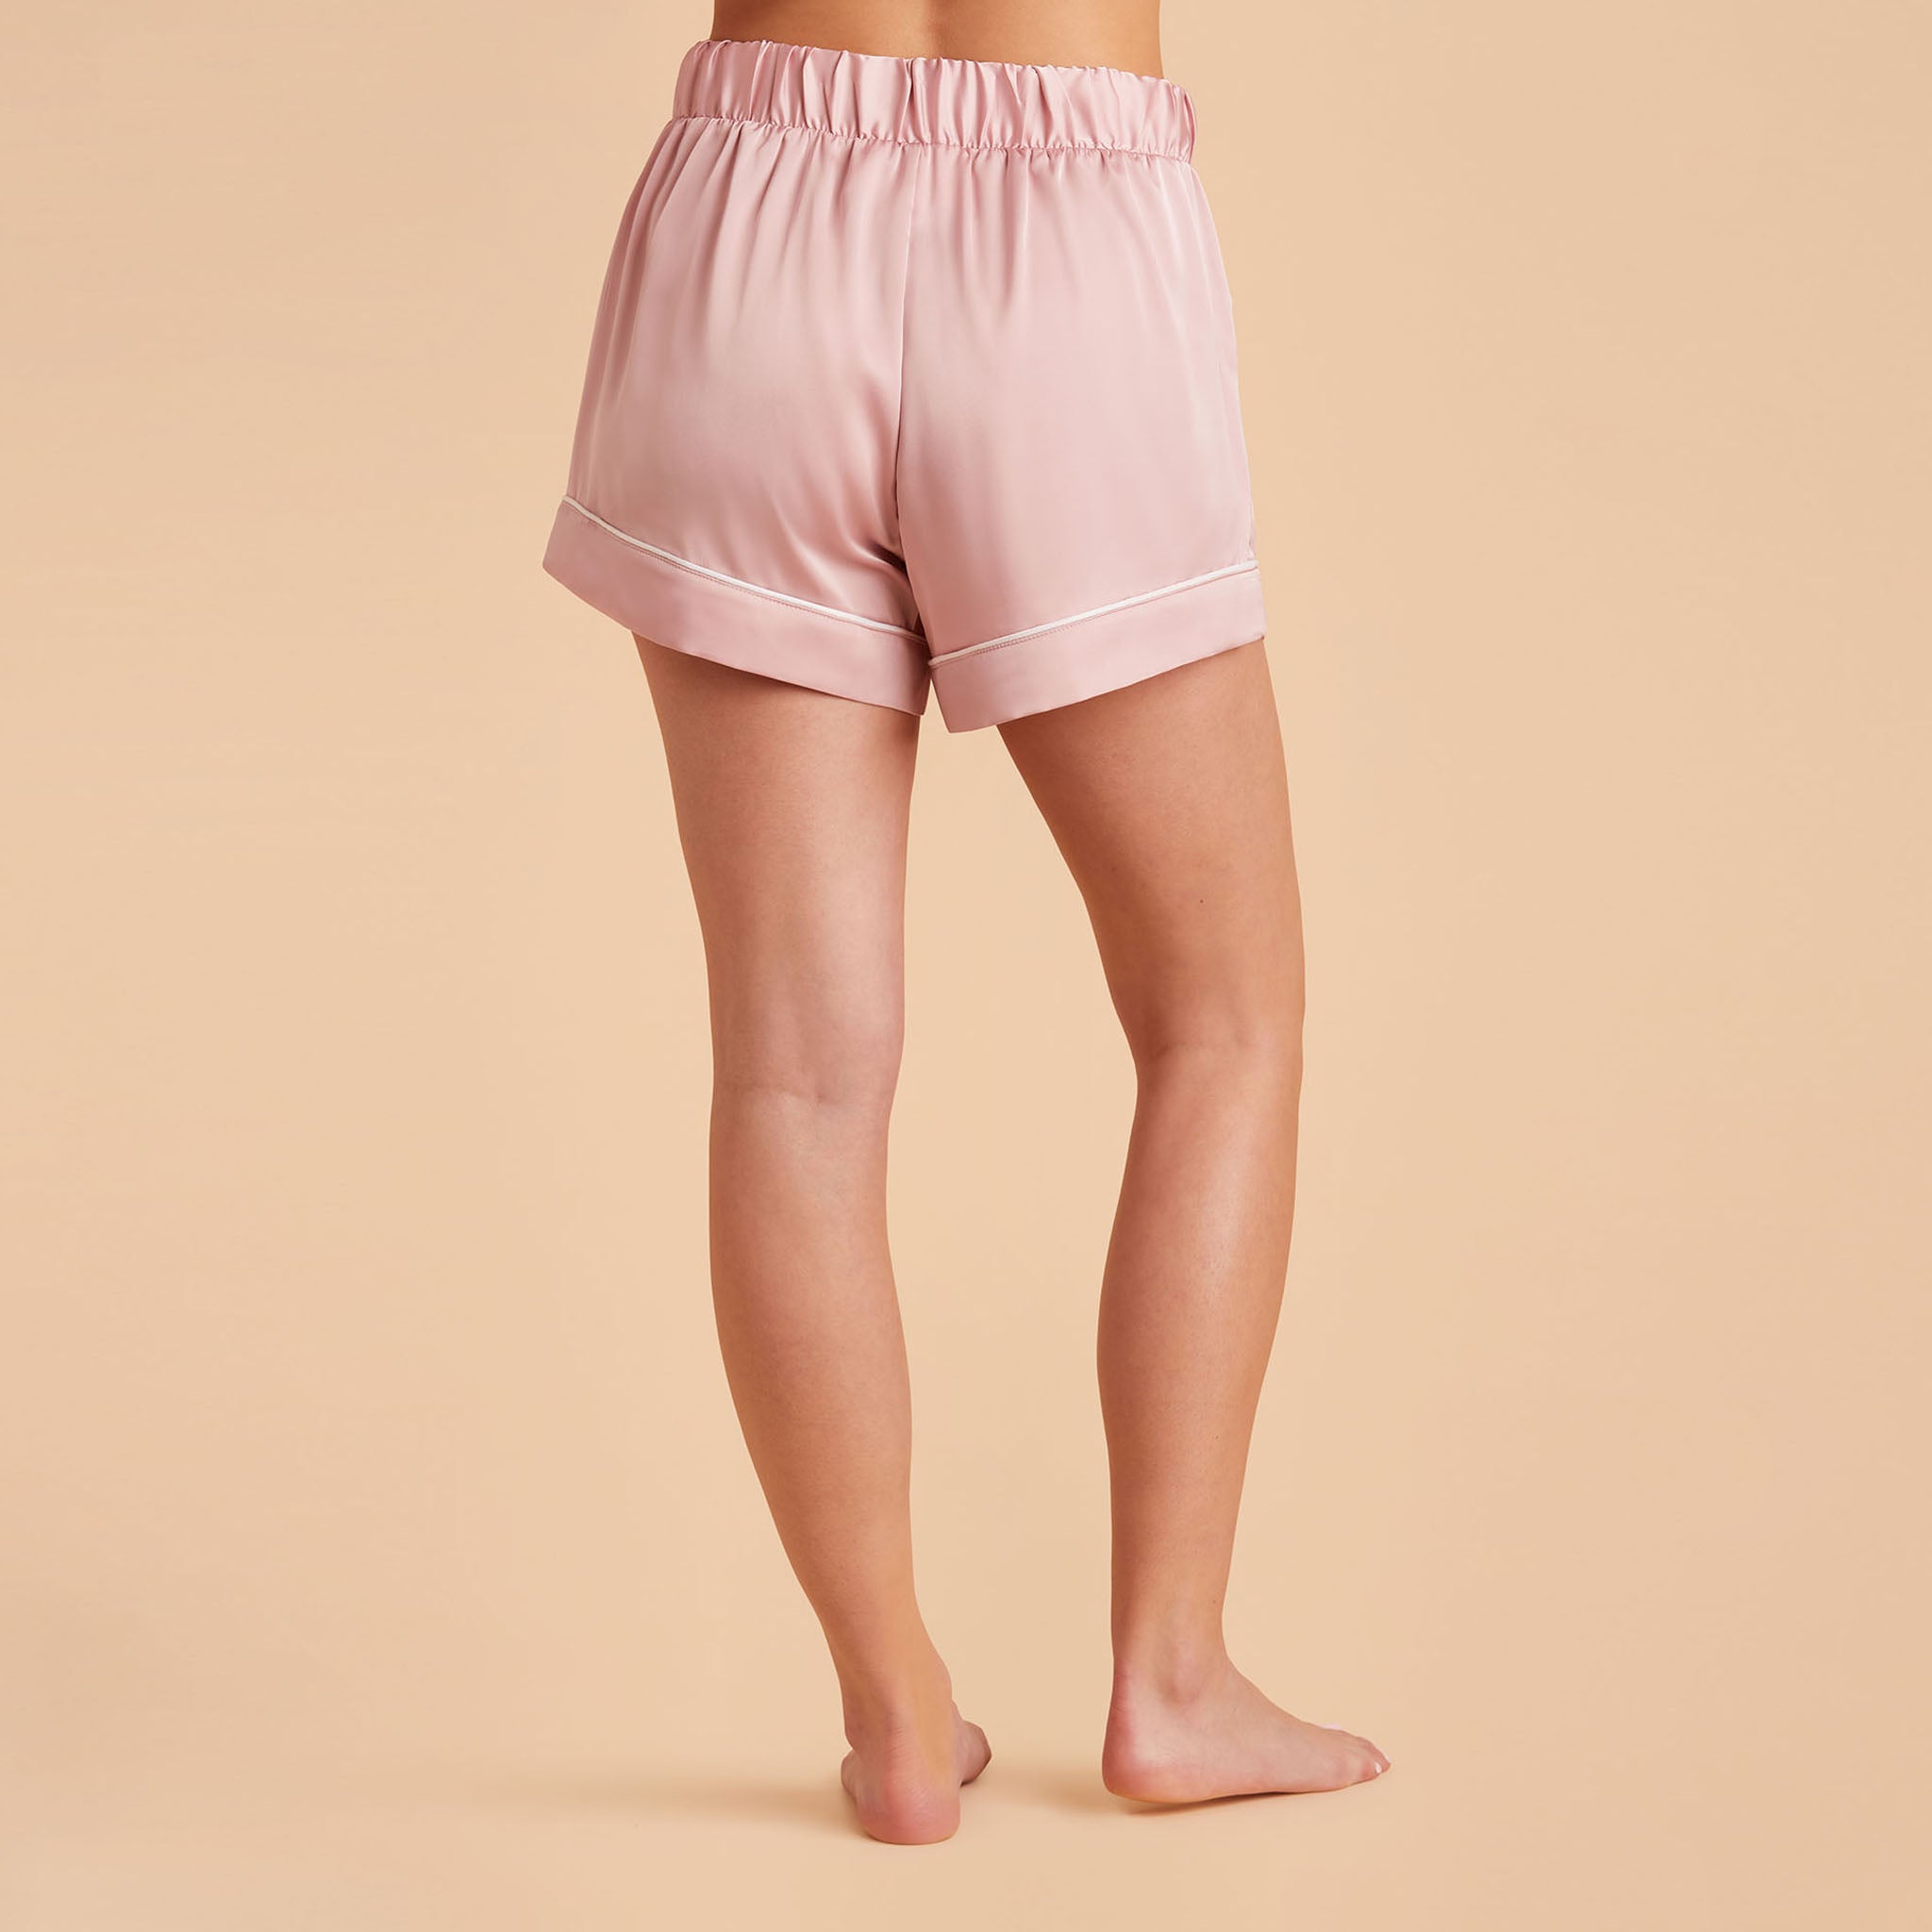 Jonny Satin Shorts Bridesmaid Pajamas With White Piping in dusty rose, back view